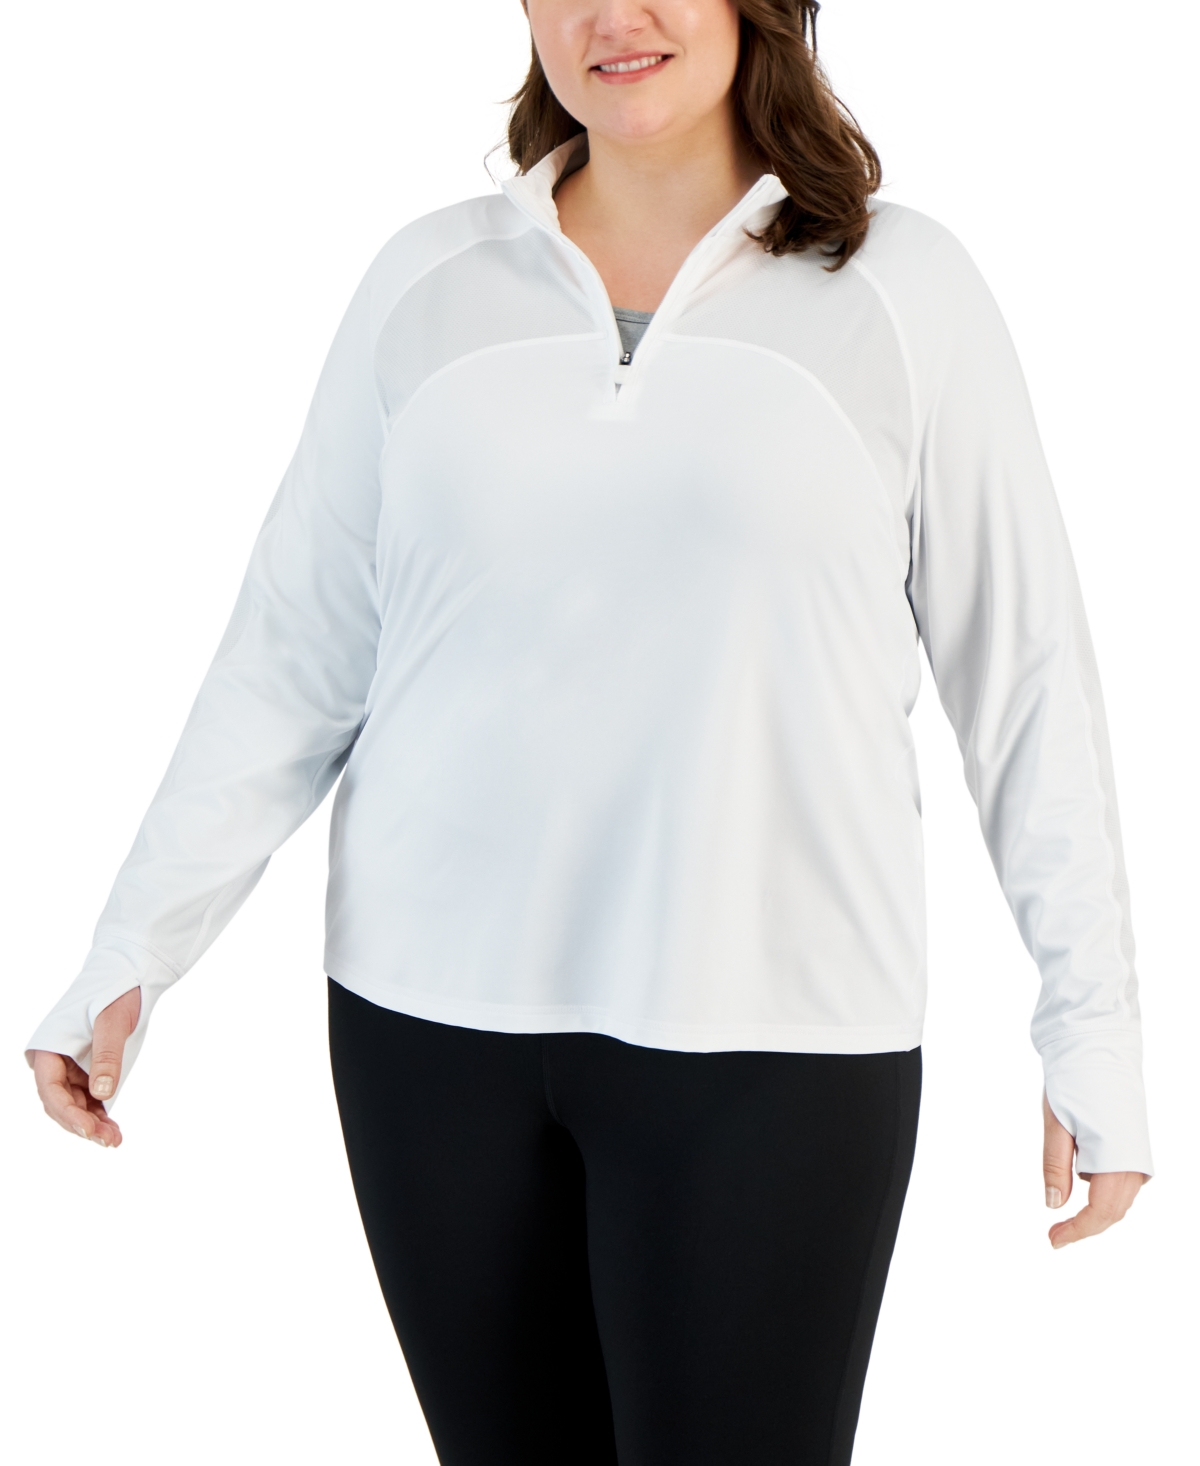 Plus Size Quarter Zip Long Sleeve Top, Created for Macy's - Skysail Blue